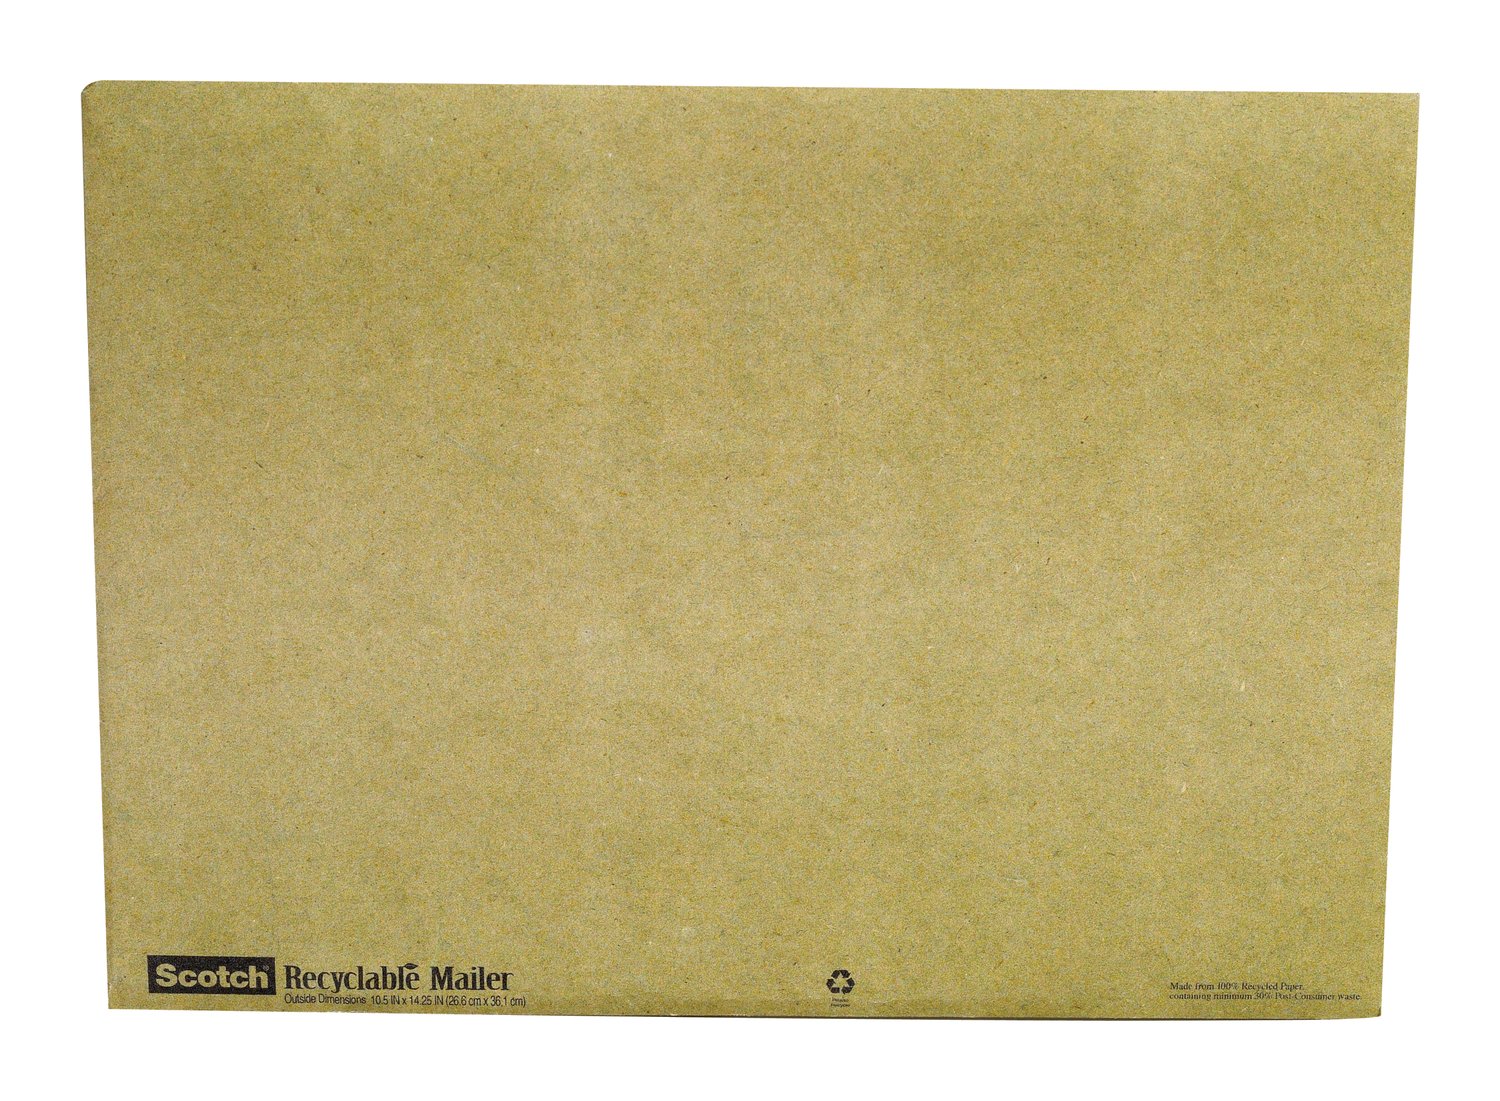 7010340445 - Scotch Padded Mailer 6915, 10 in x 14 in, Recyclable Mailer